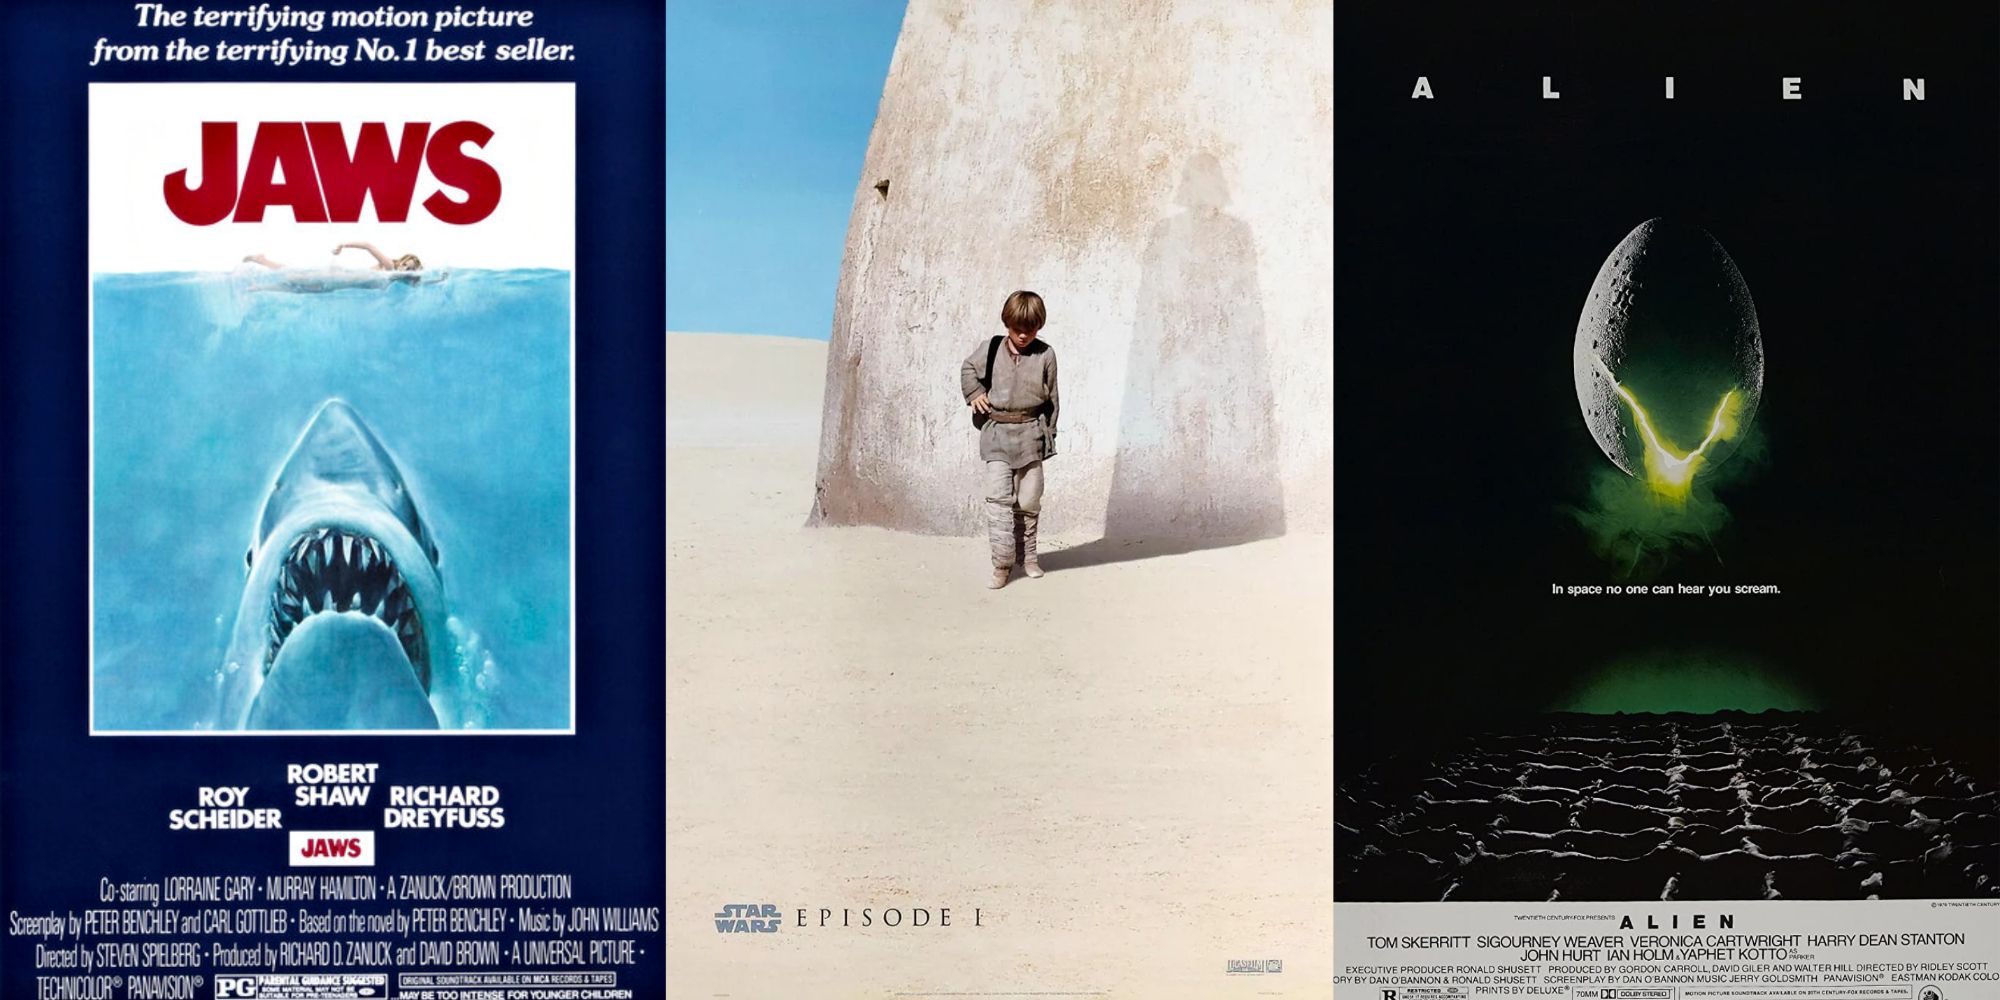 top movie posters of all time